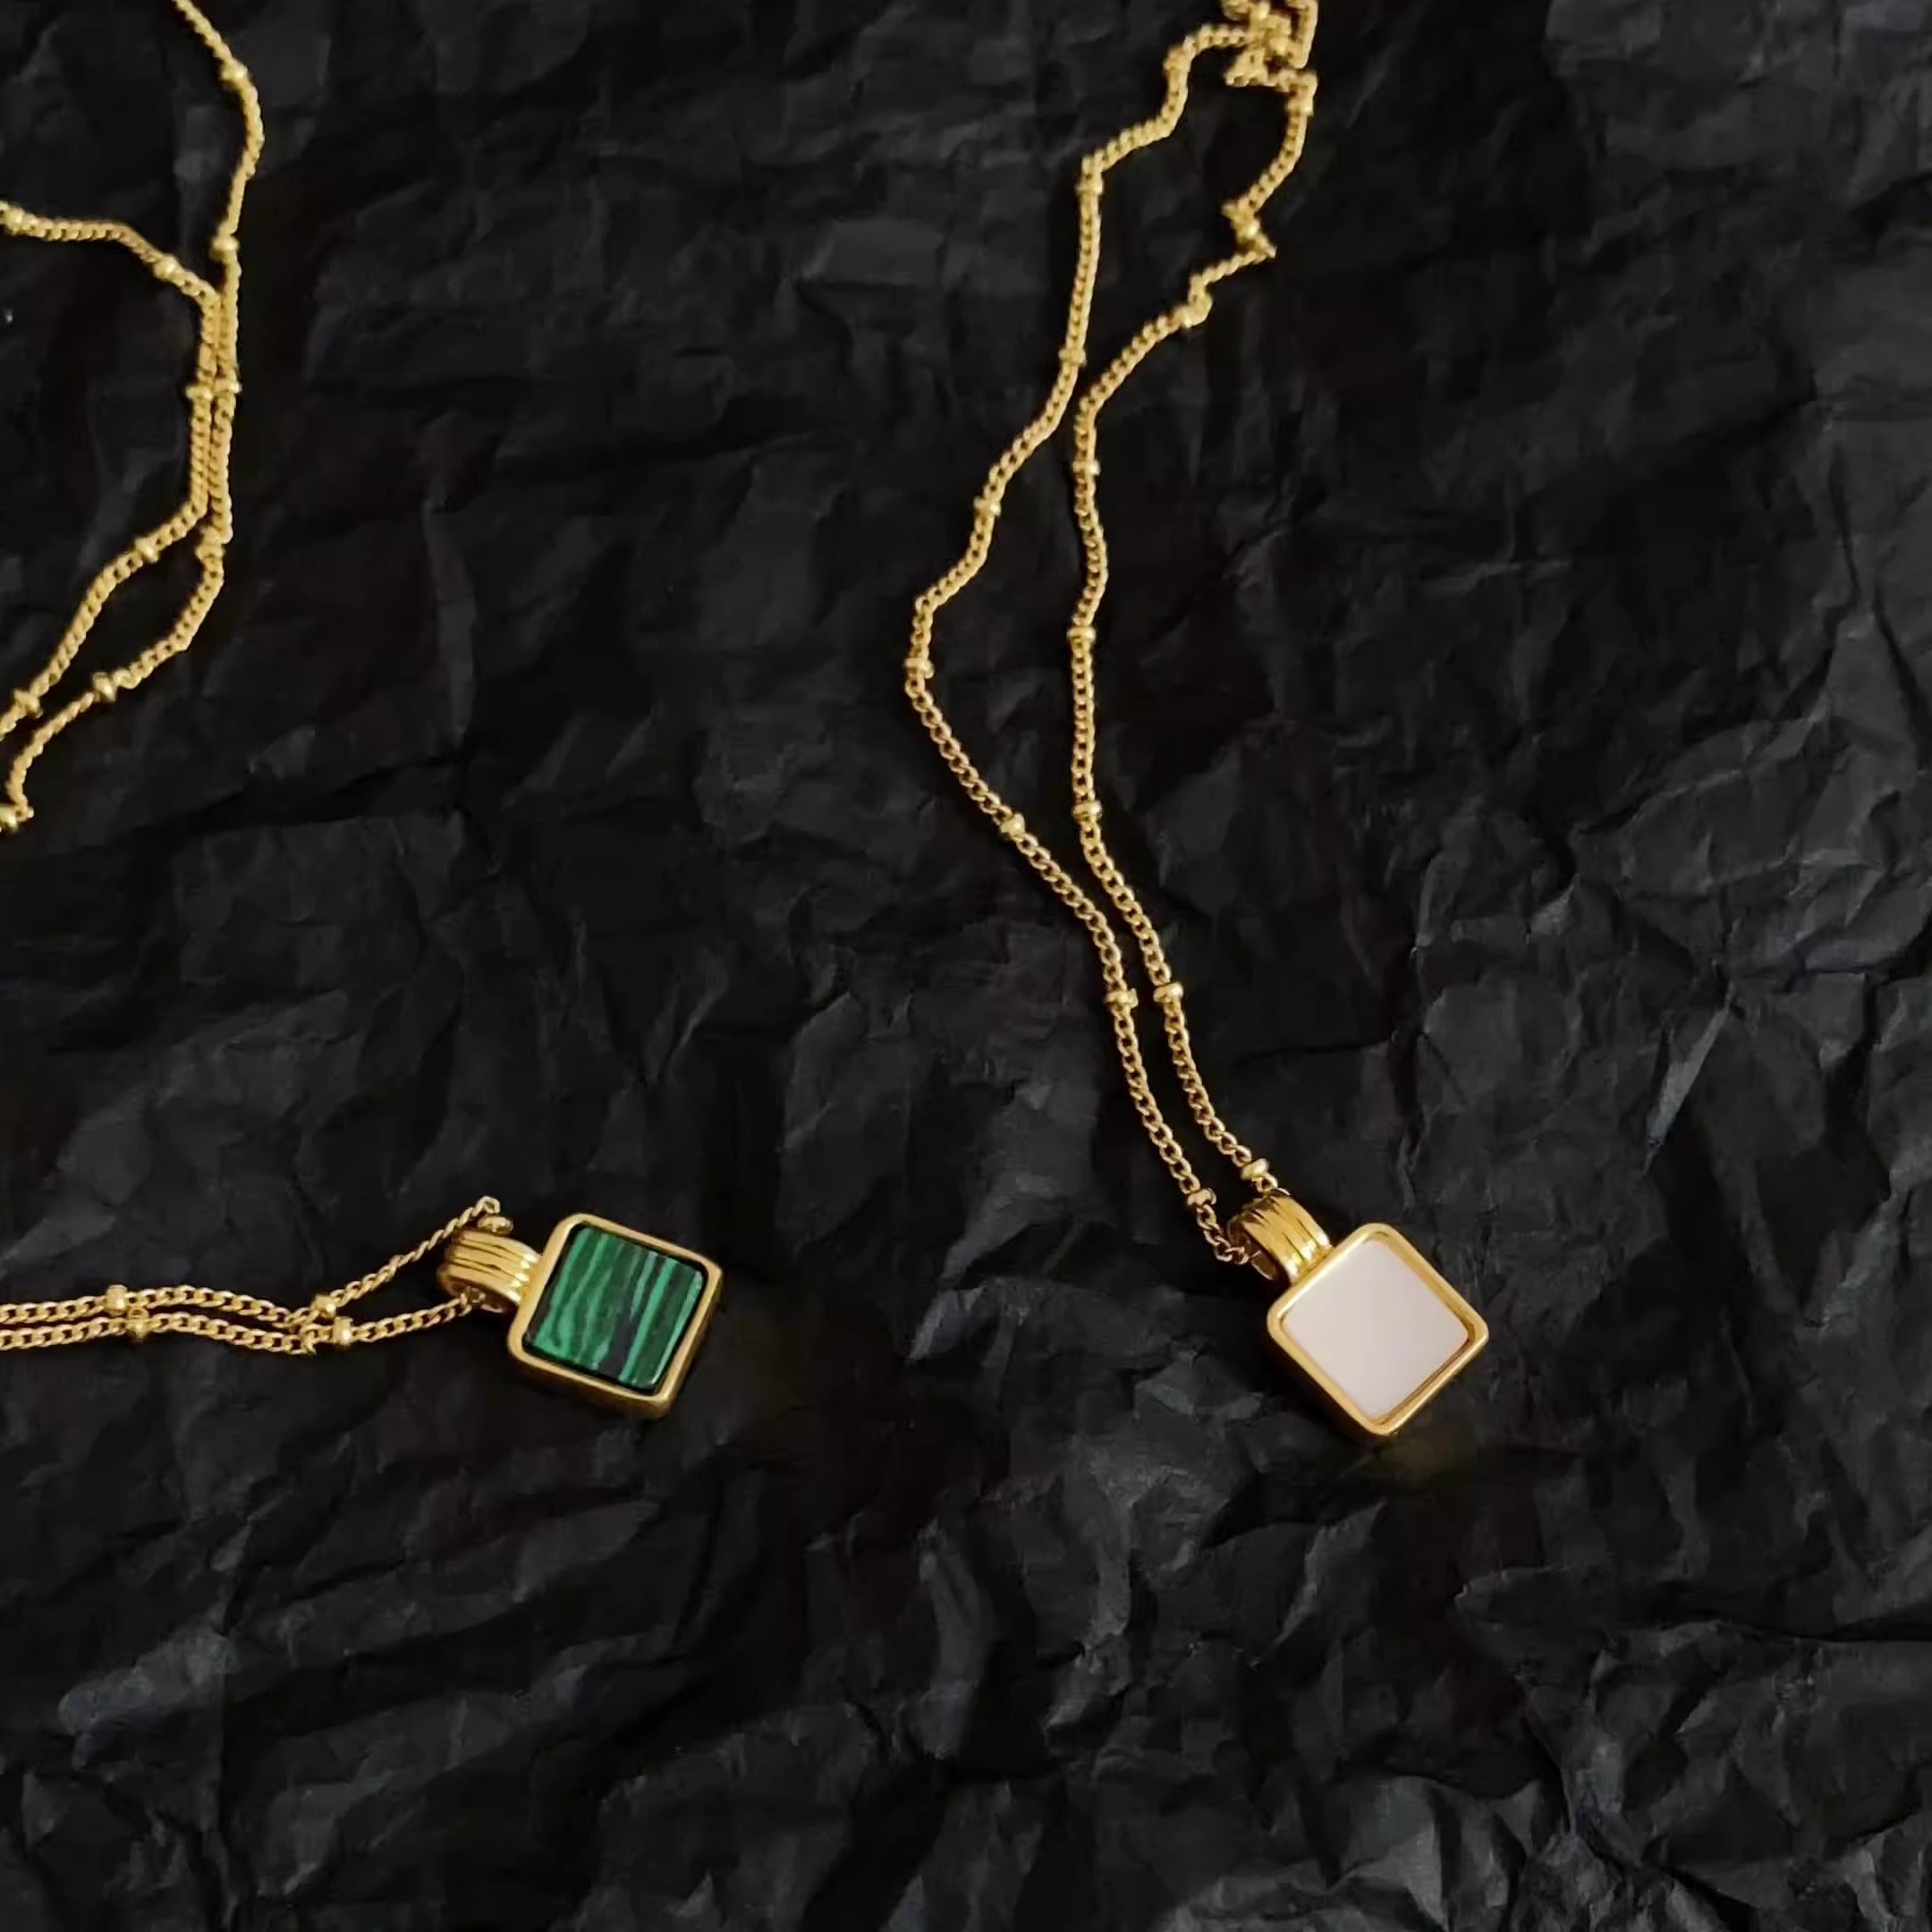 Savi's vintage style distressed brass gold-plated malachite mother of pearl pearl necklace is popular on the internet